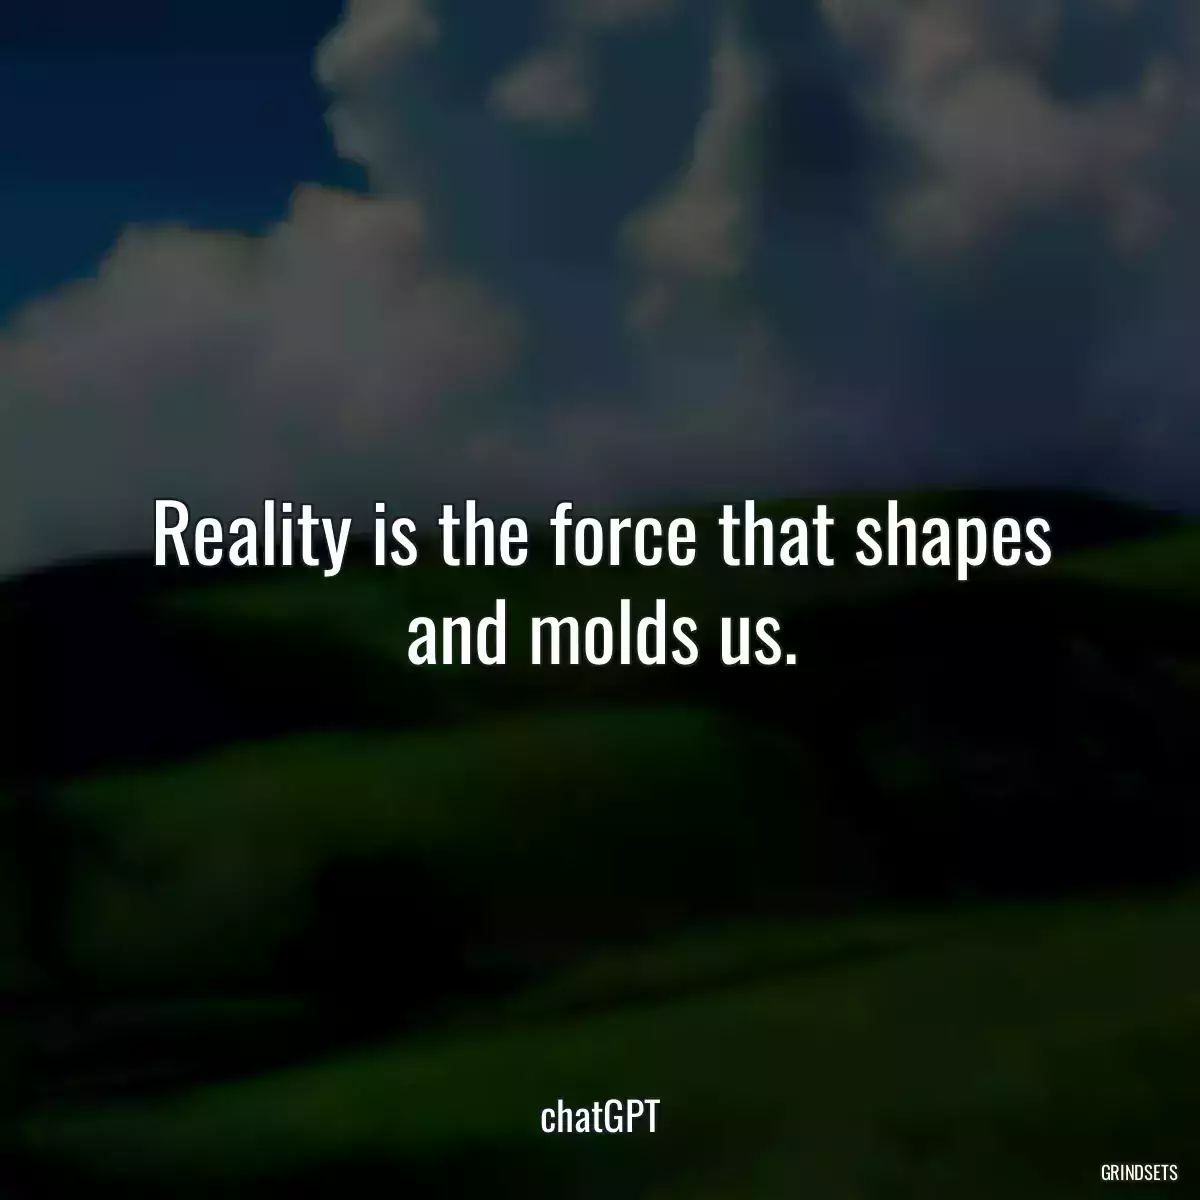 Reality is the force that shapes and molds us.